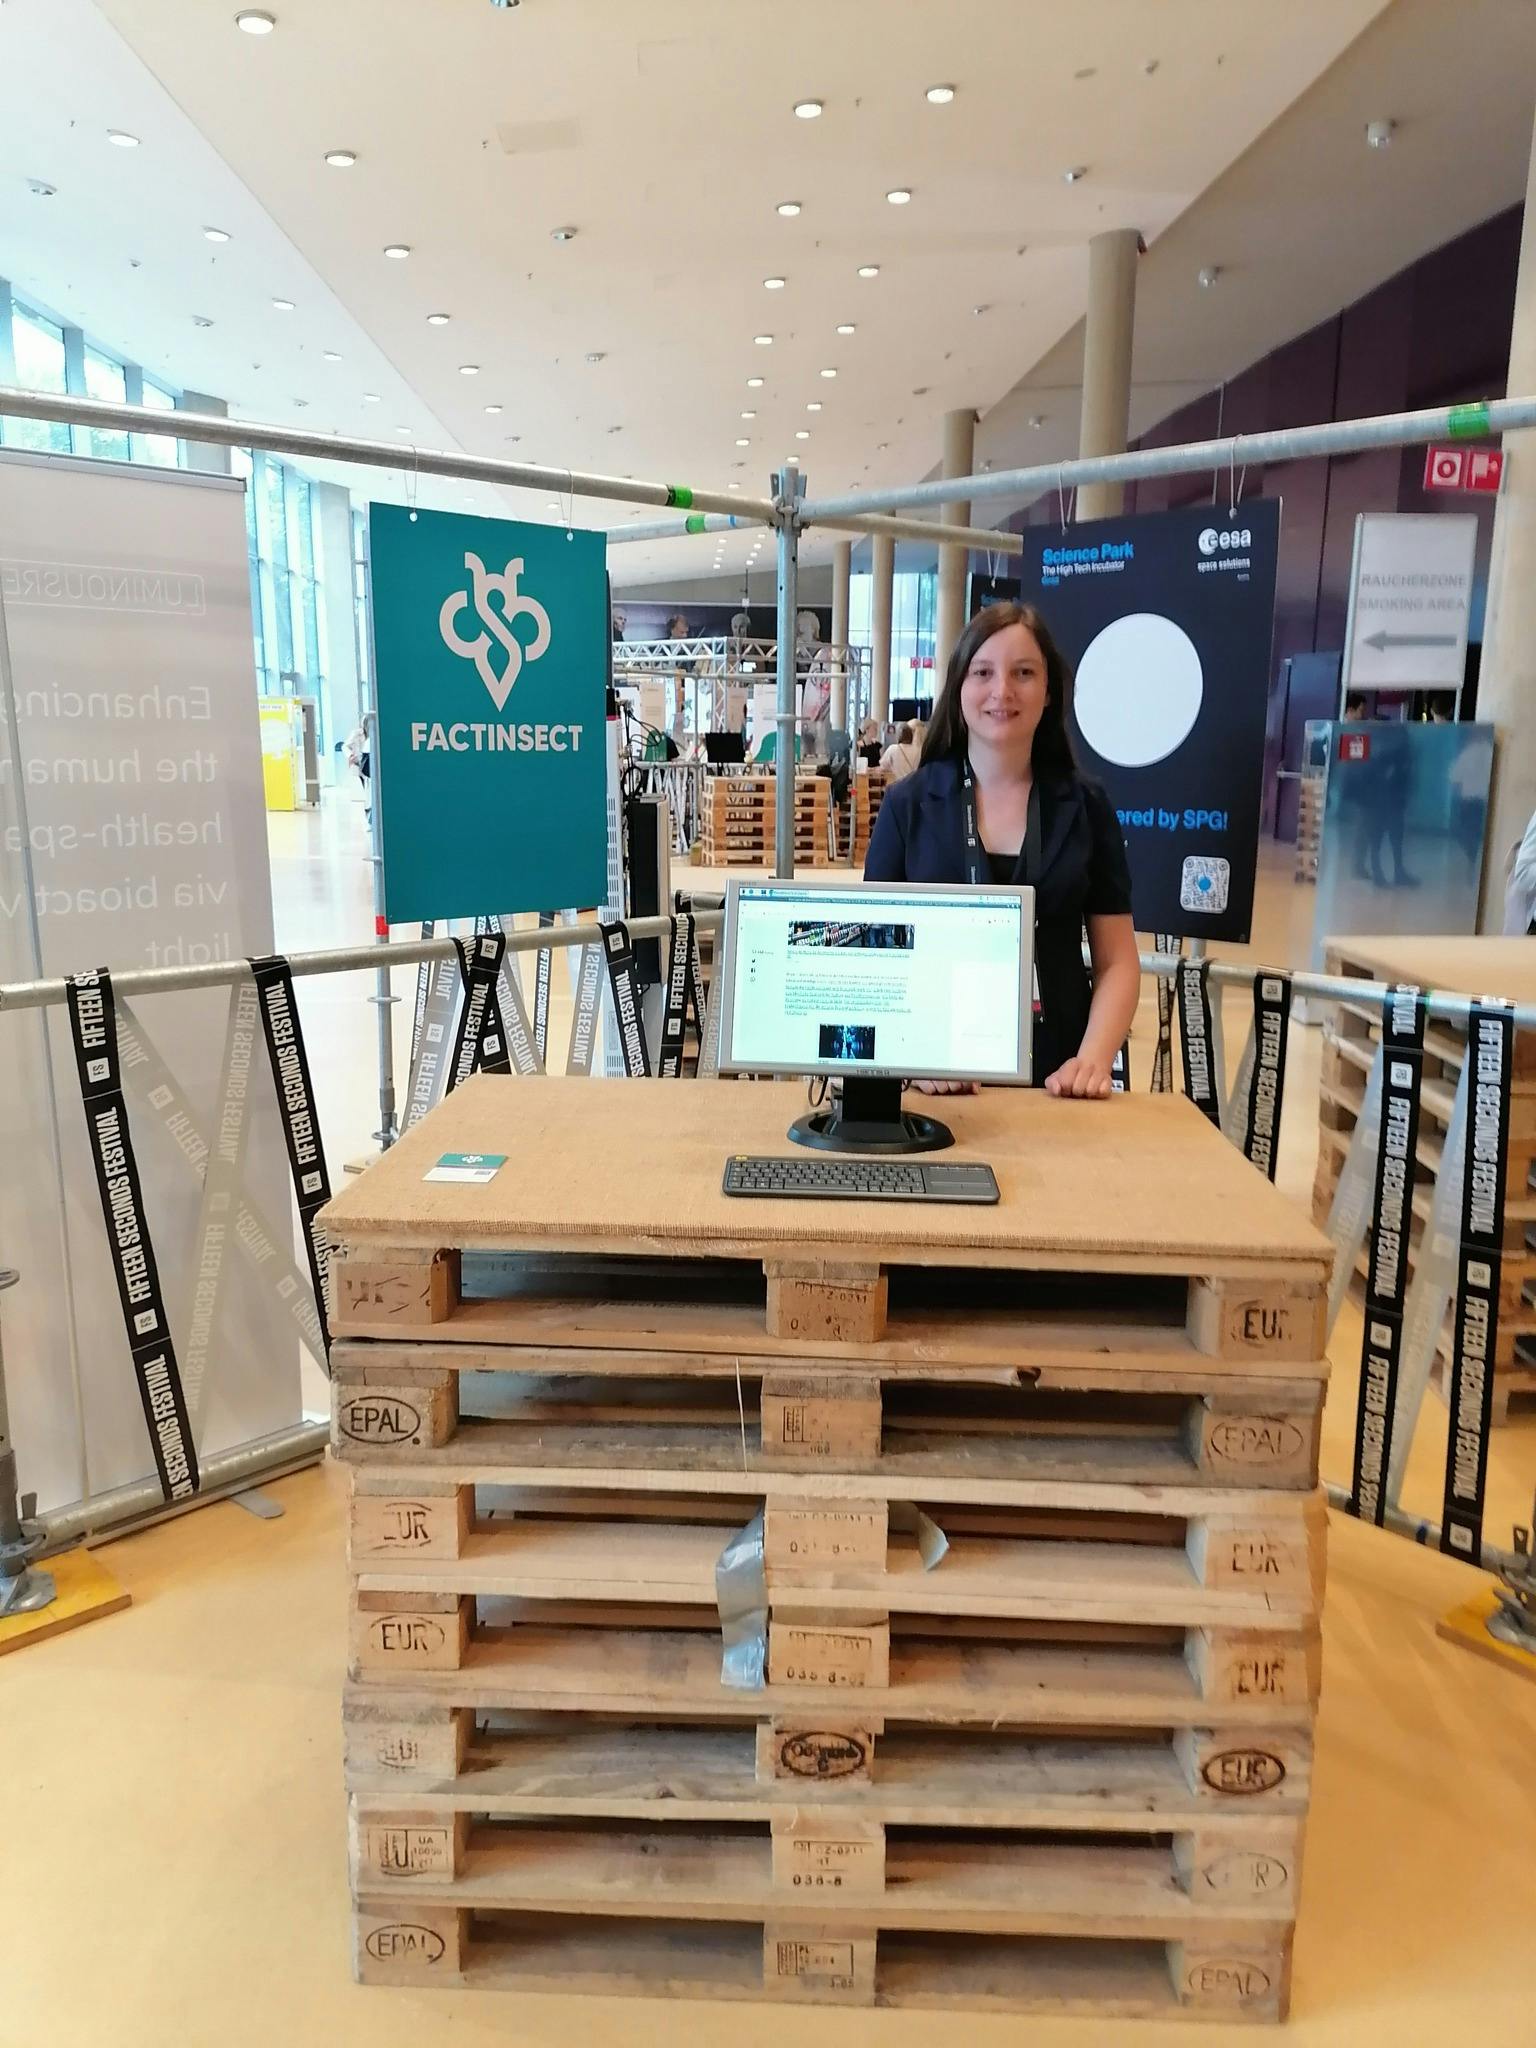 Factinsect CEO/CTO Romana Dorfer am Factinsect Stand beim Fifteen Seconds Festival.